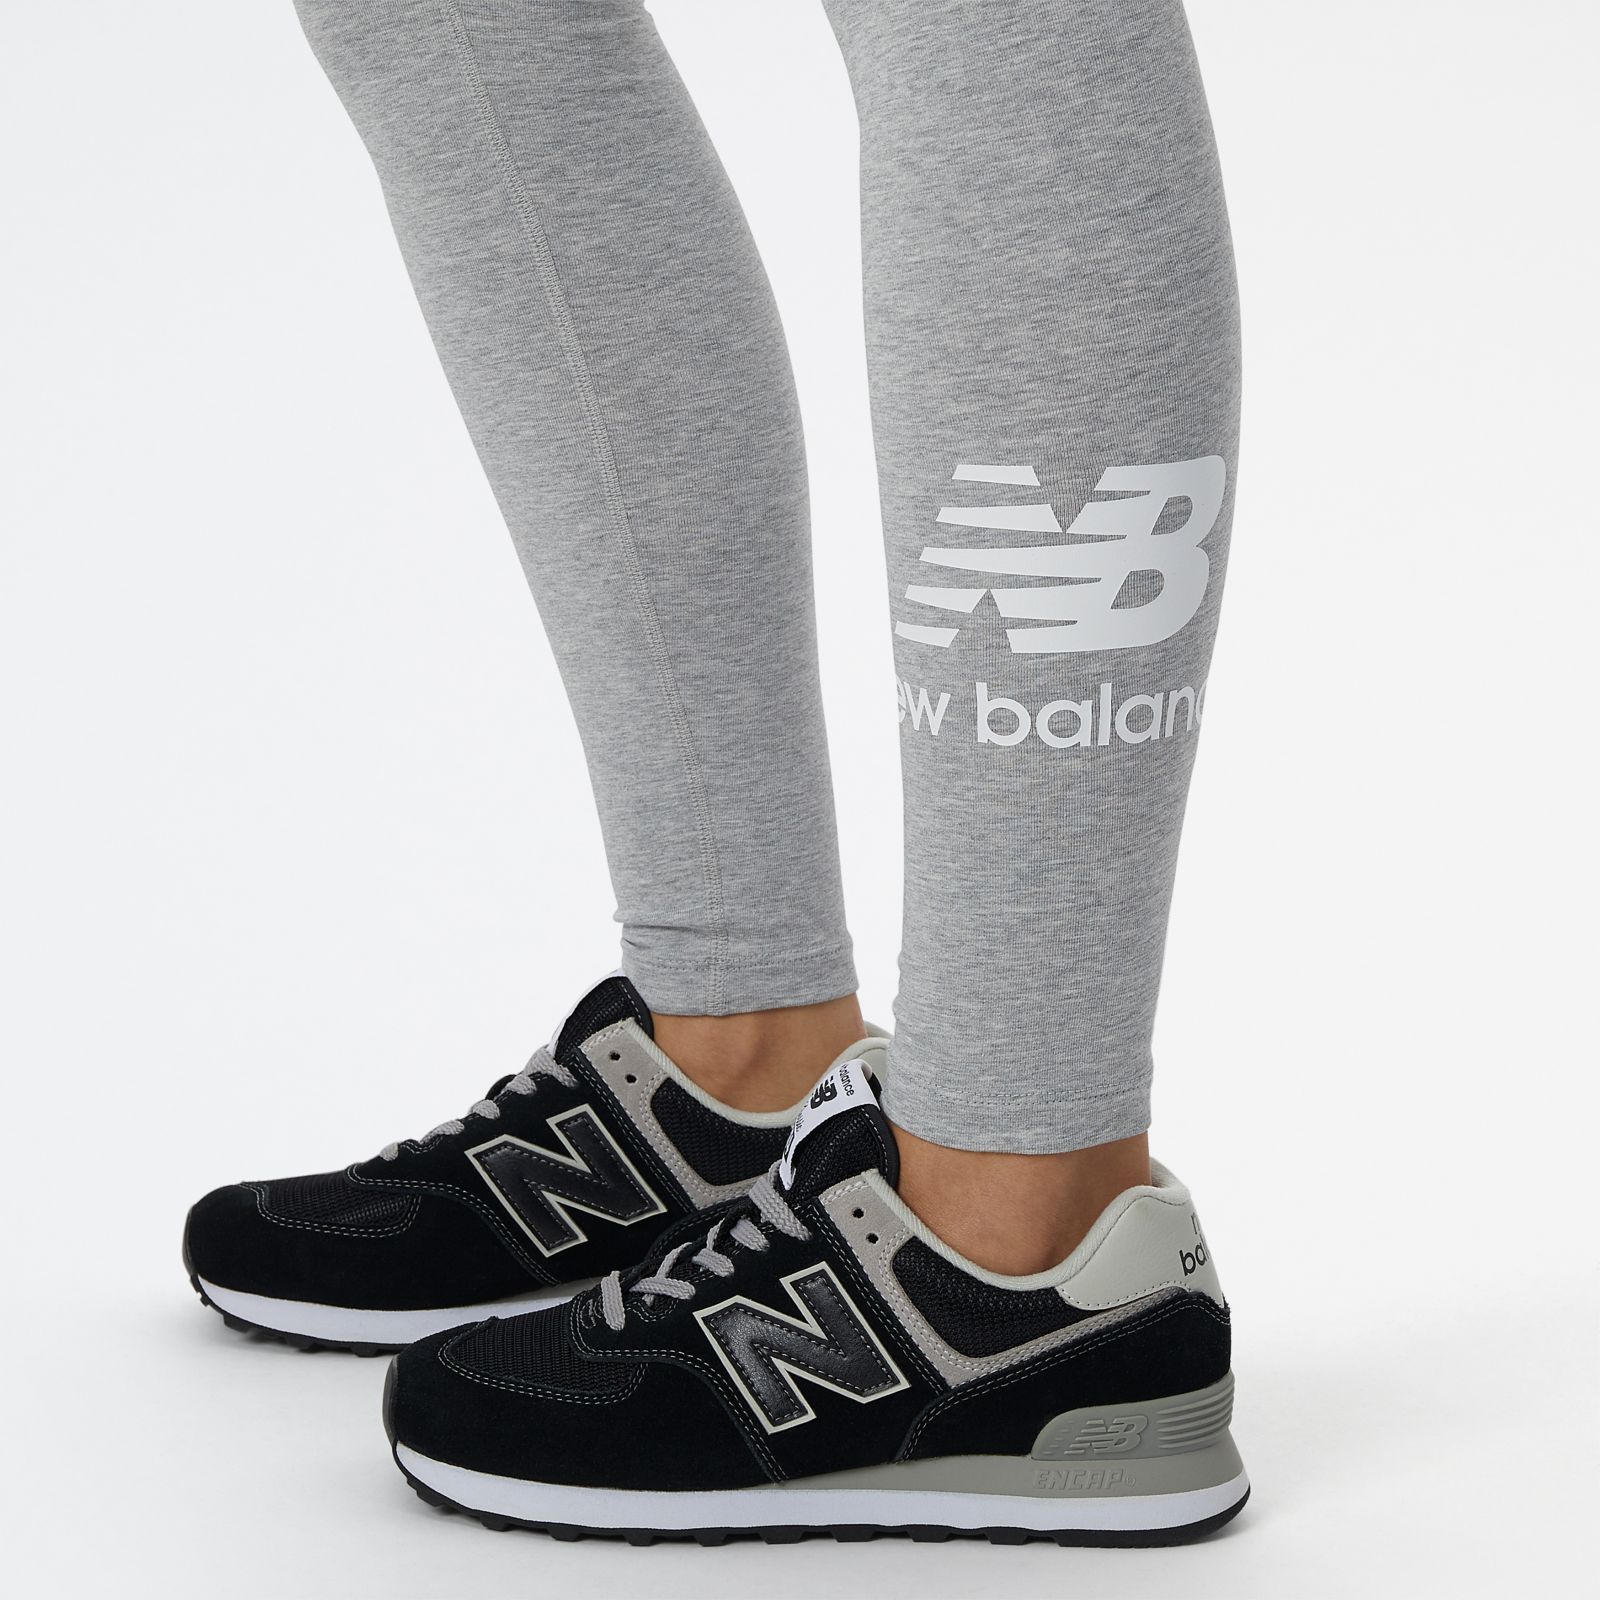 New Balance Women's Nb Essentials Stacked Legging, Athletic Grey